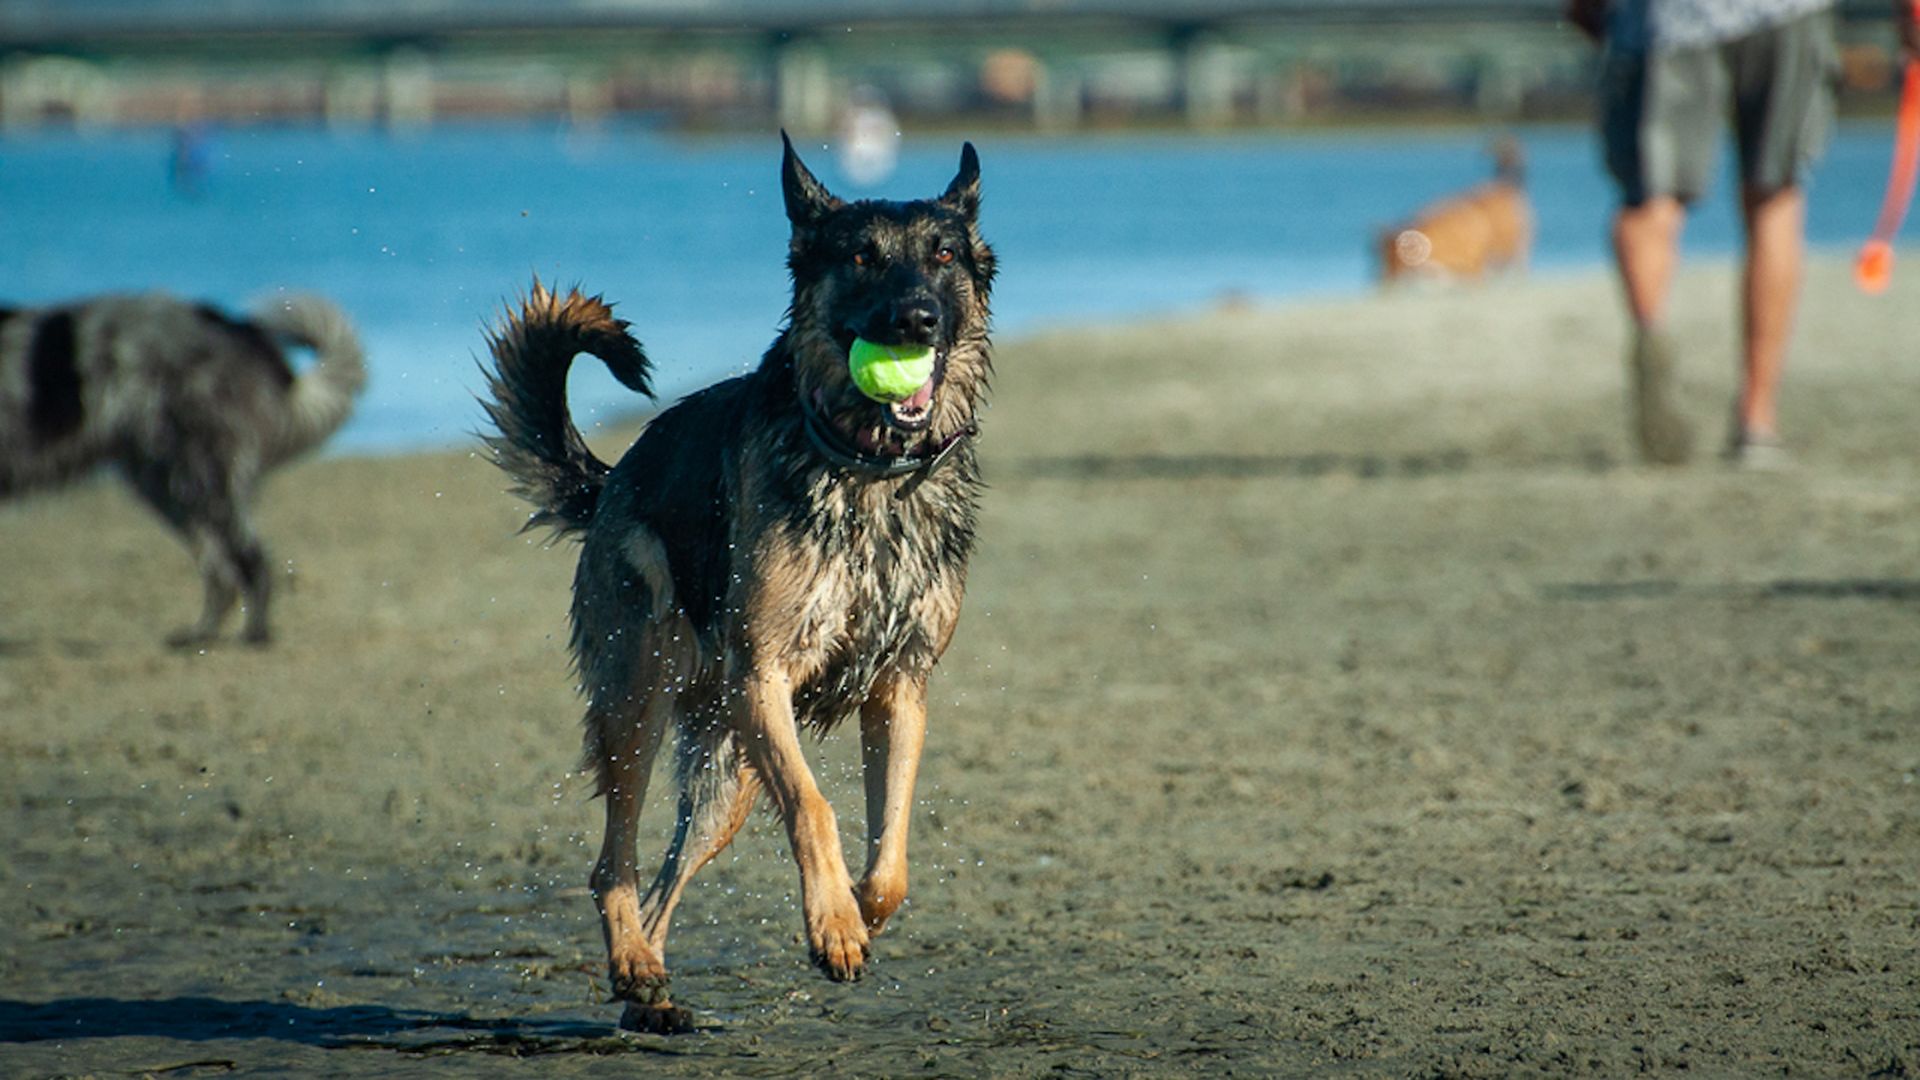 A dog catches a tennis ball in its mouth on a sandy beach with the ocean and other dogs in the background.